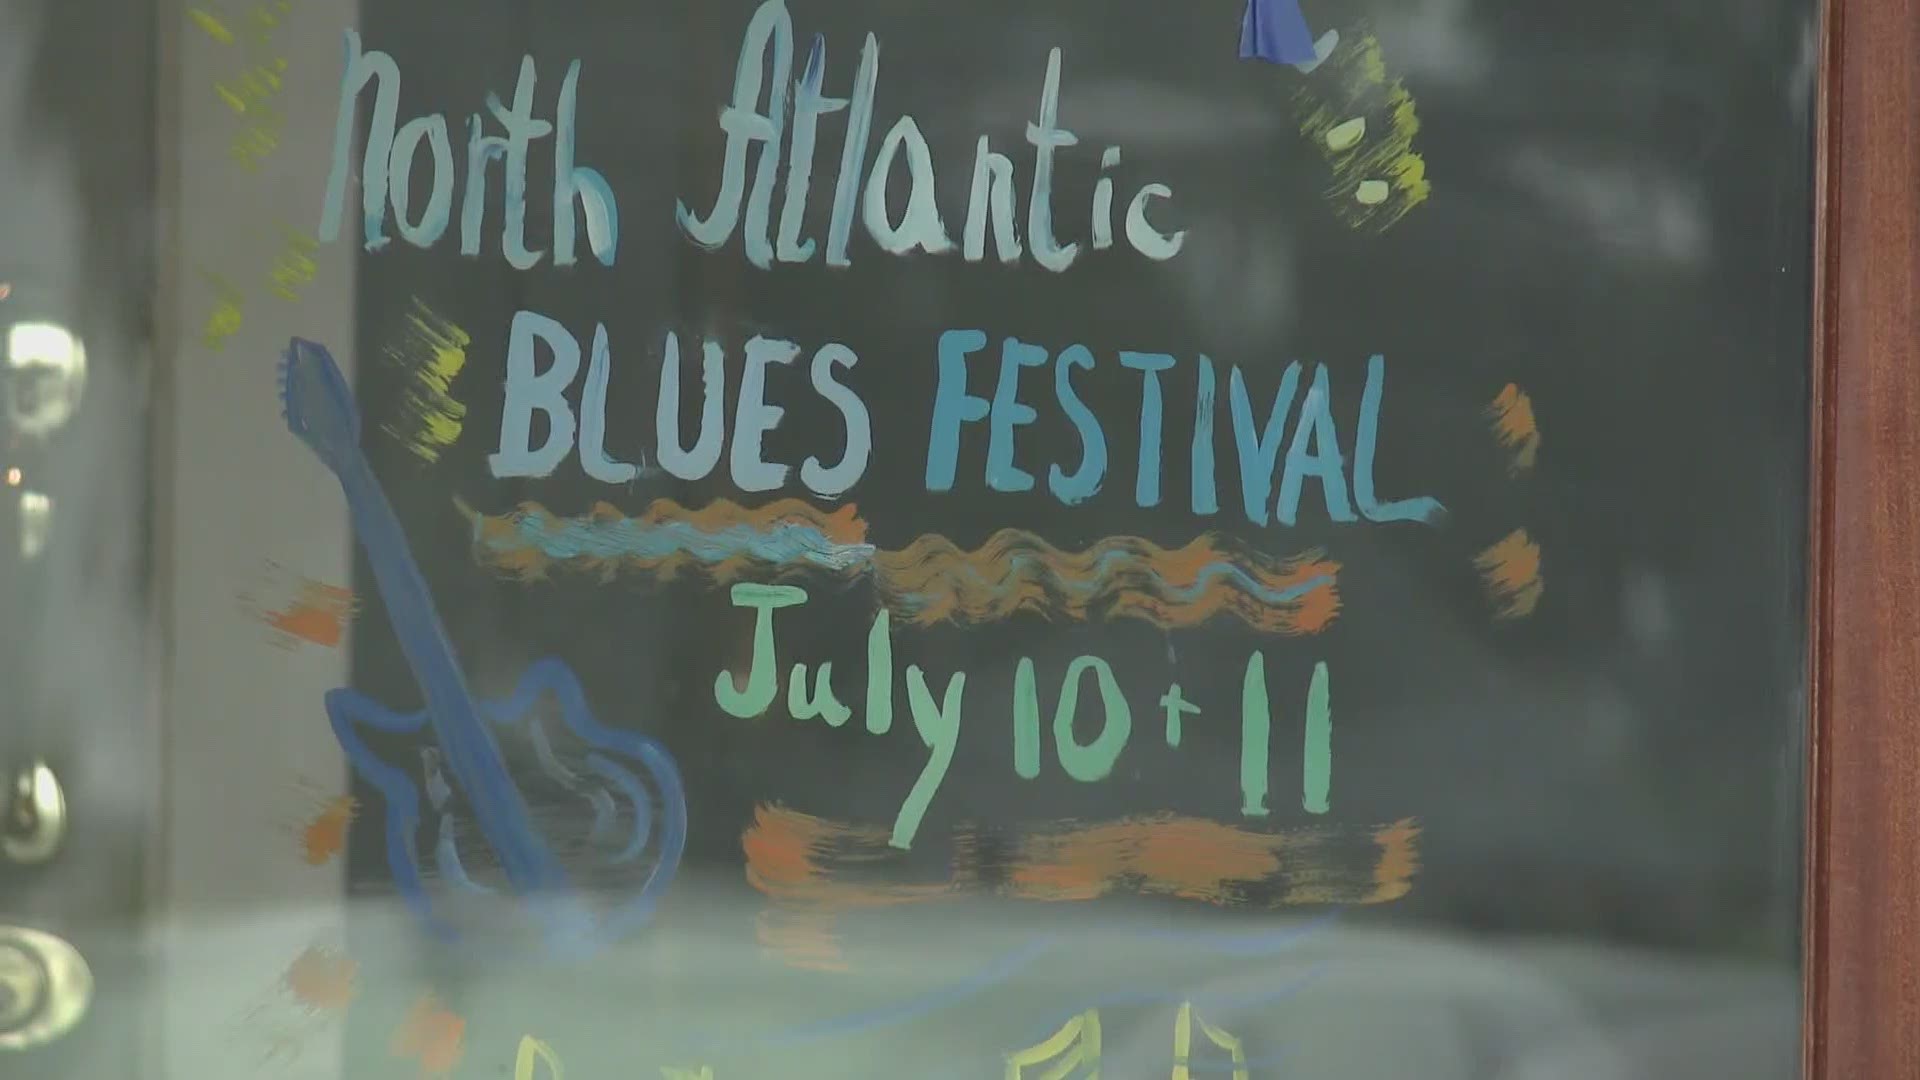 The festival draws music fans from all over the country to Rockland for the two day celebration, and merchants in town are excited to see the visitors coming back.